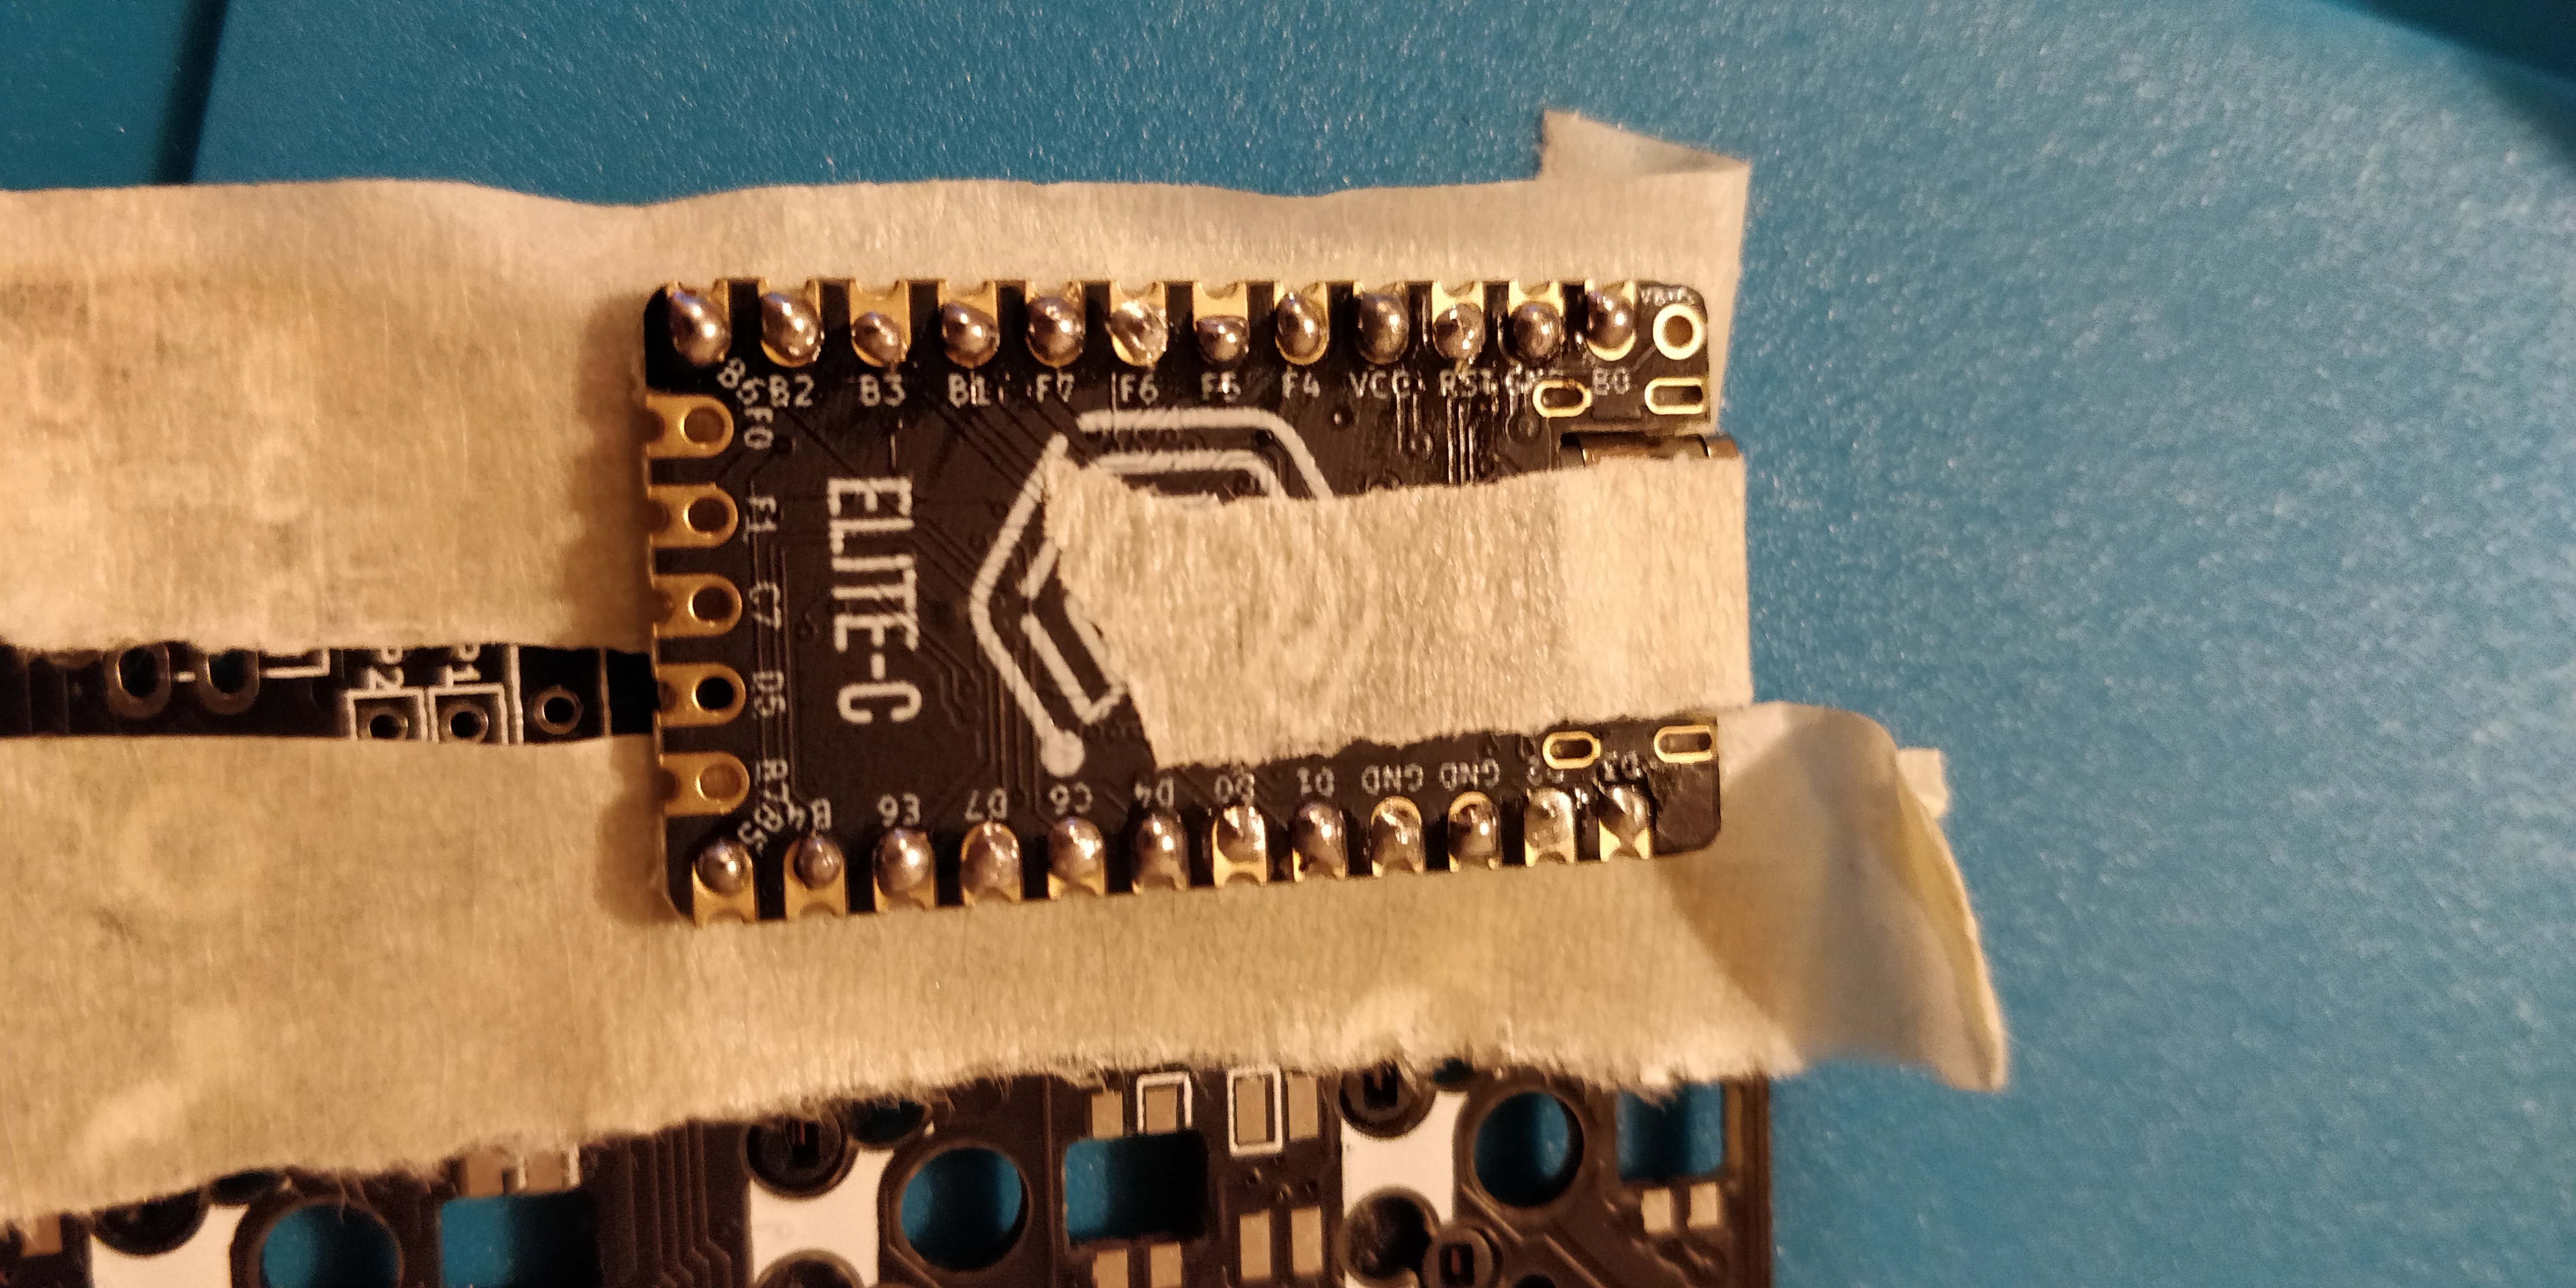 step 10 - corne crkbd - place microcontroller through pins and solder